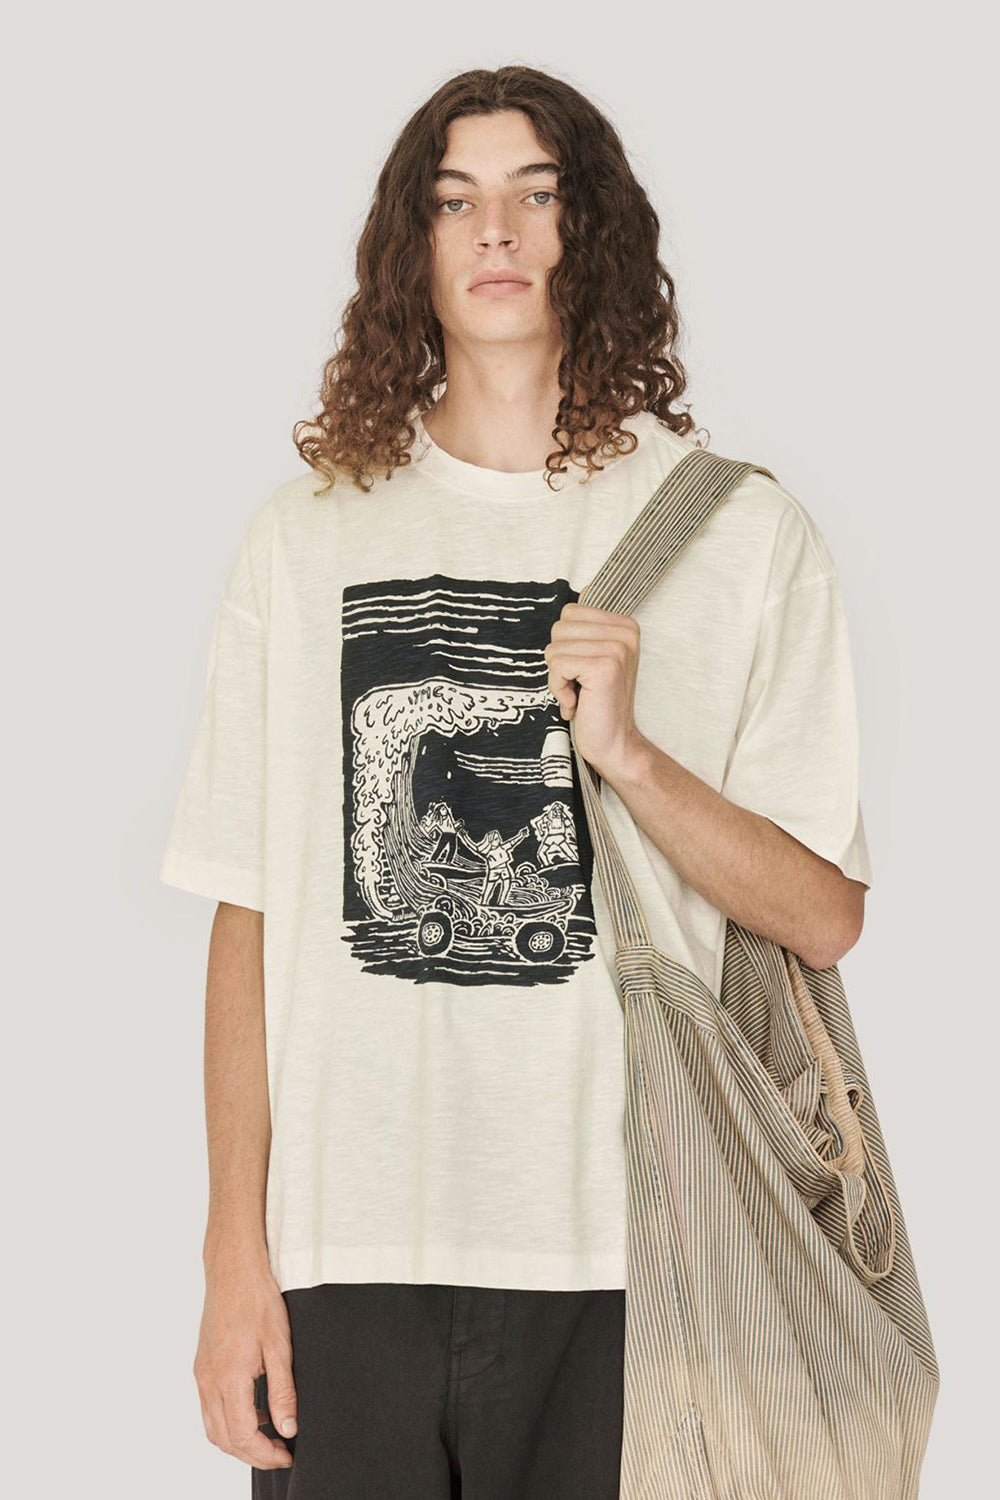 On The Mountain Pass T shirt